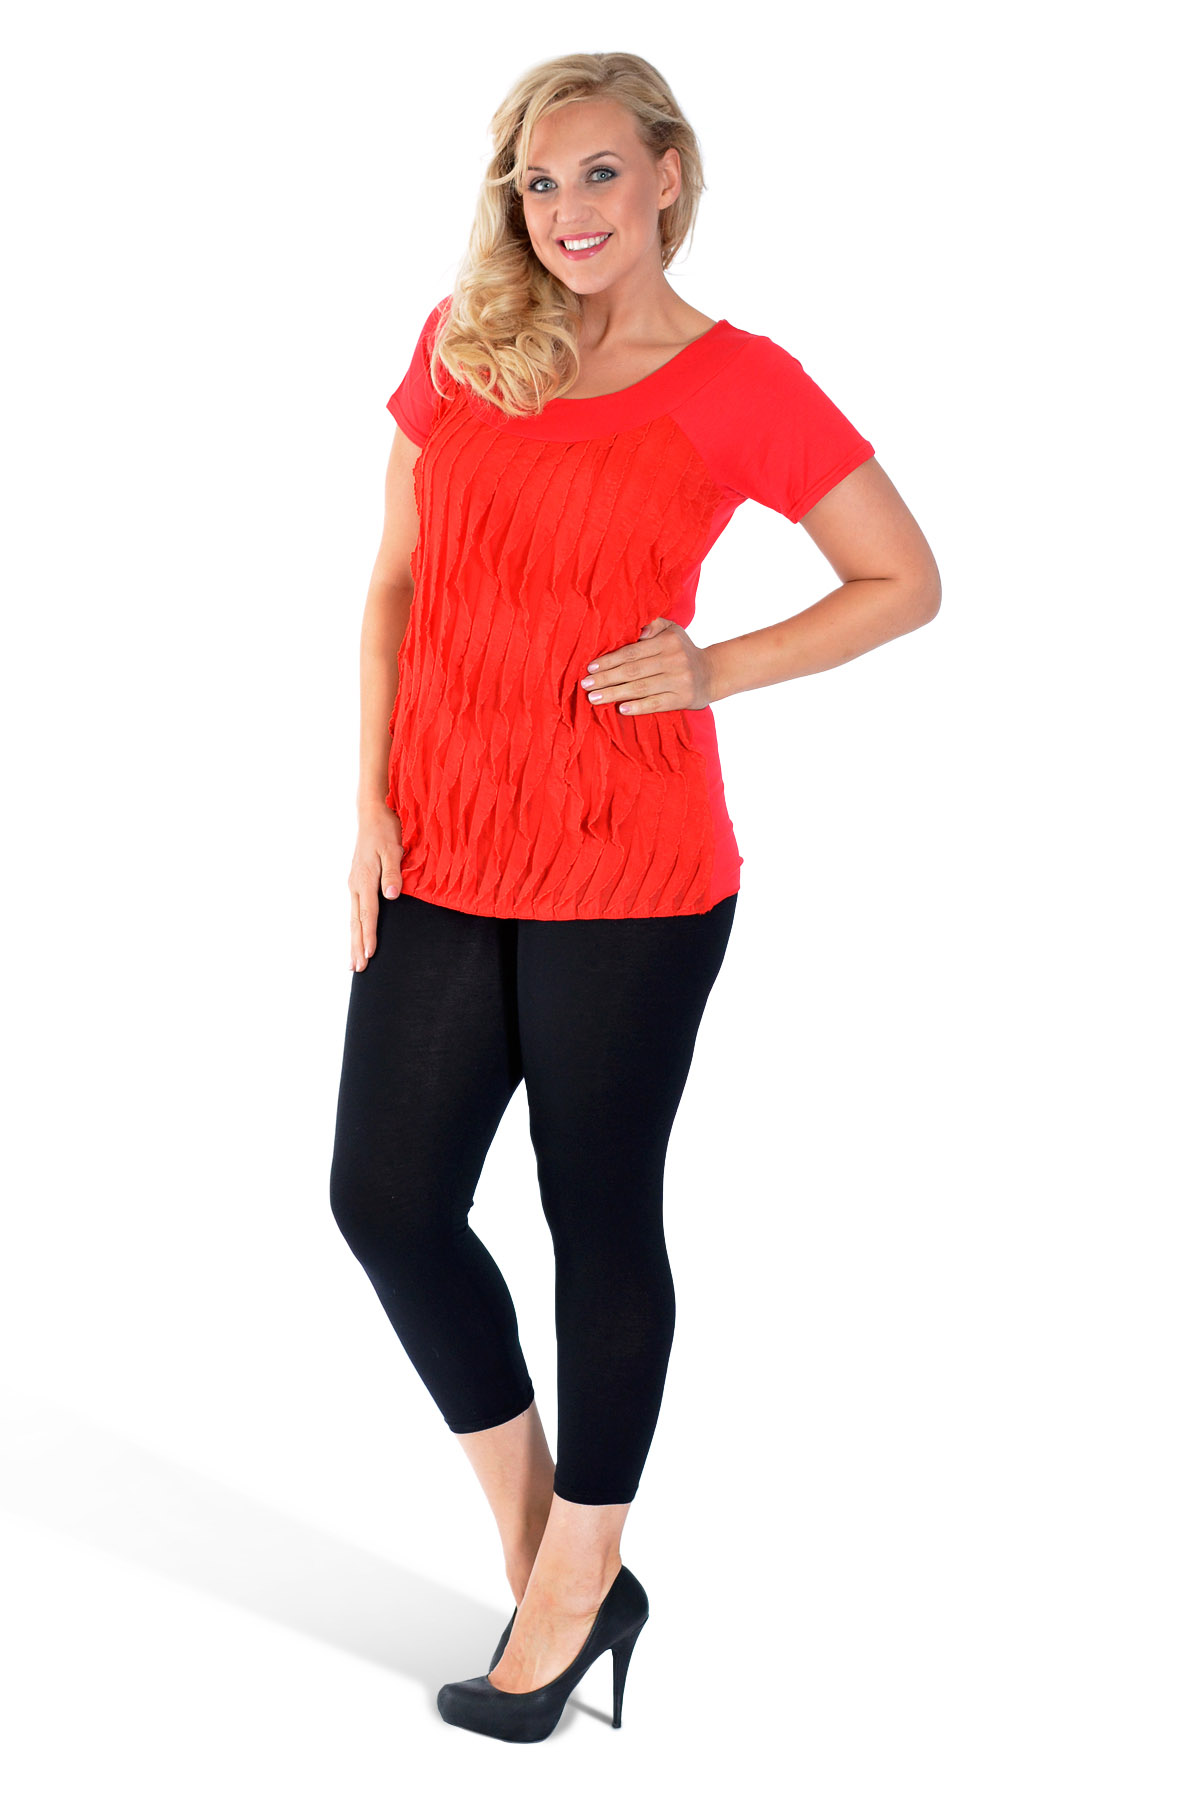 Plus size tunic tops for women on sale by owner